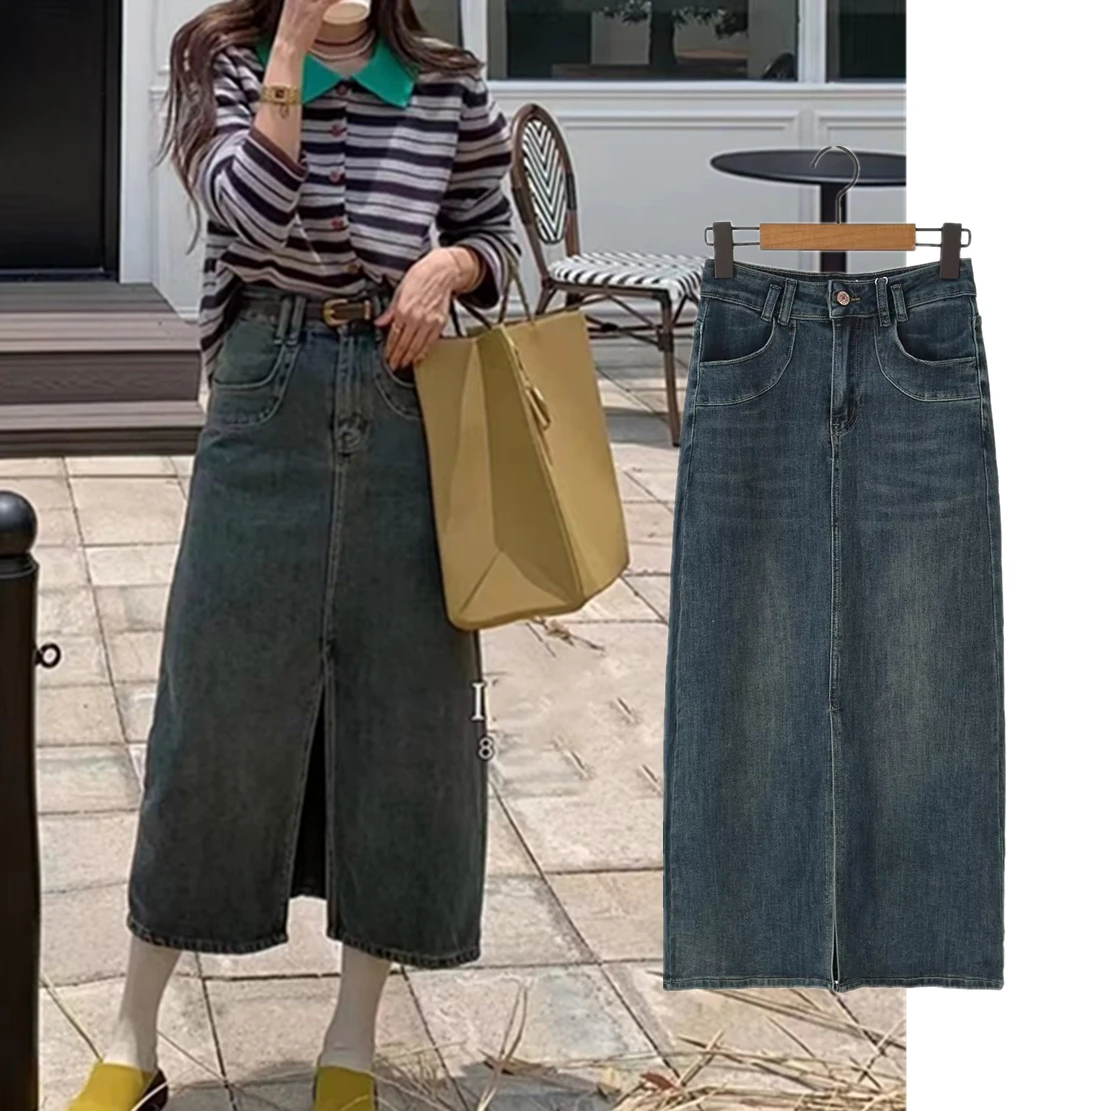 Withered Ins Fashion Blogger High Street Slit Denim Skirt High Waist Retro Washed Old Straight Midi Skirt Female women s street retro jeans trend 3d digital printing straight leg pants casual slim sexy wide leg pants in europe and america